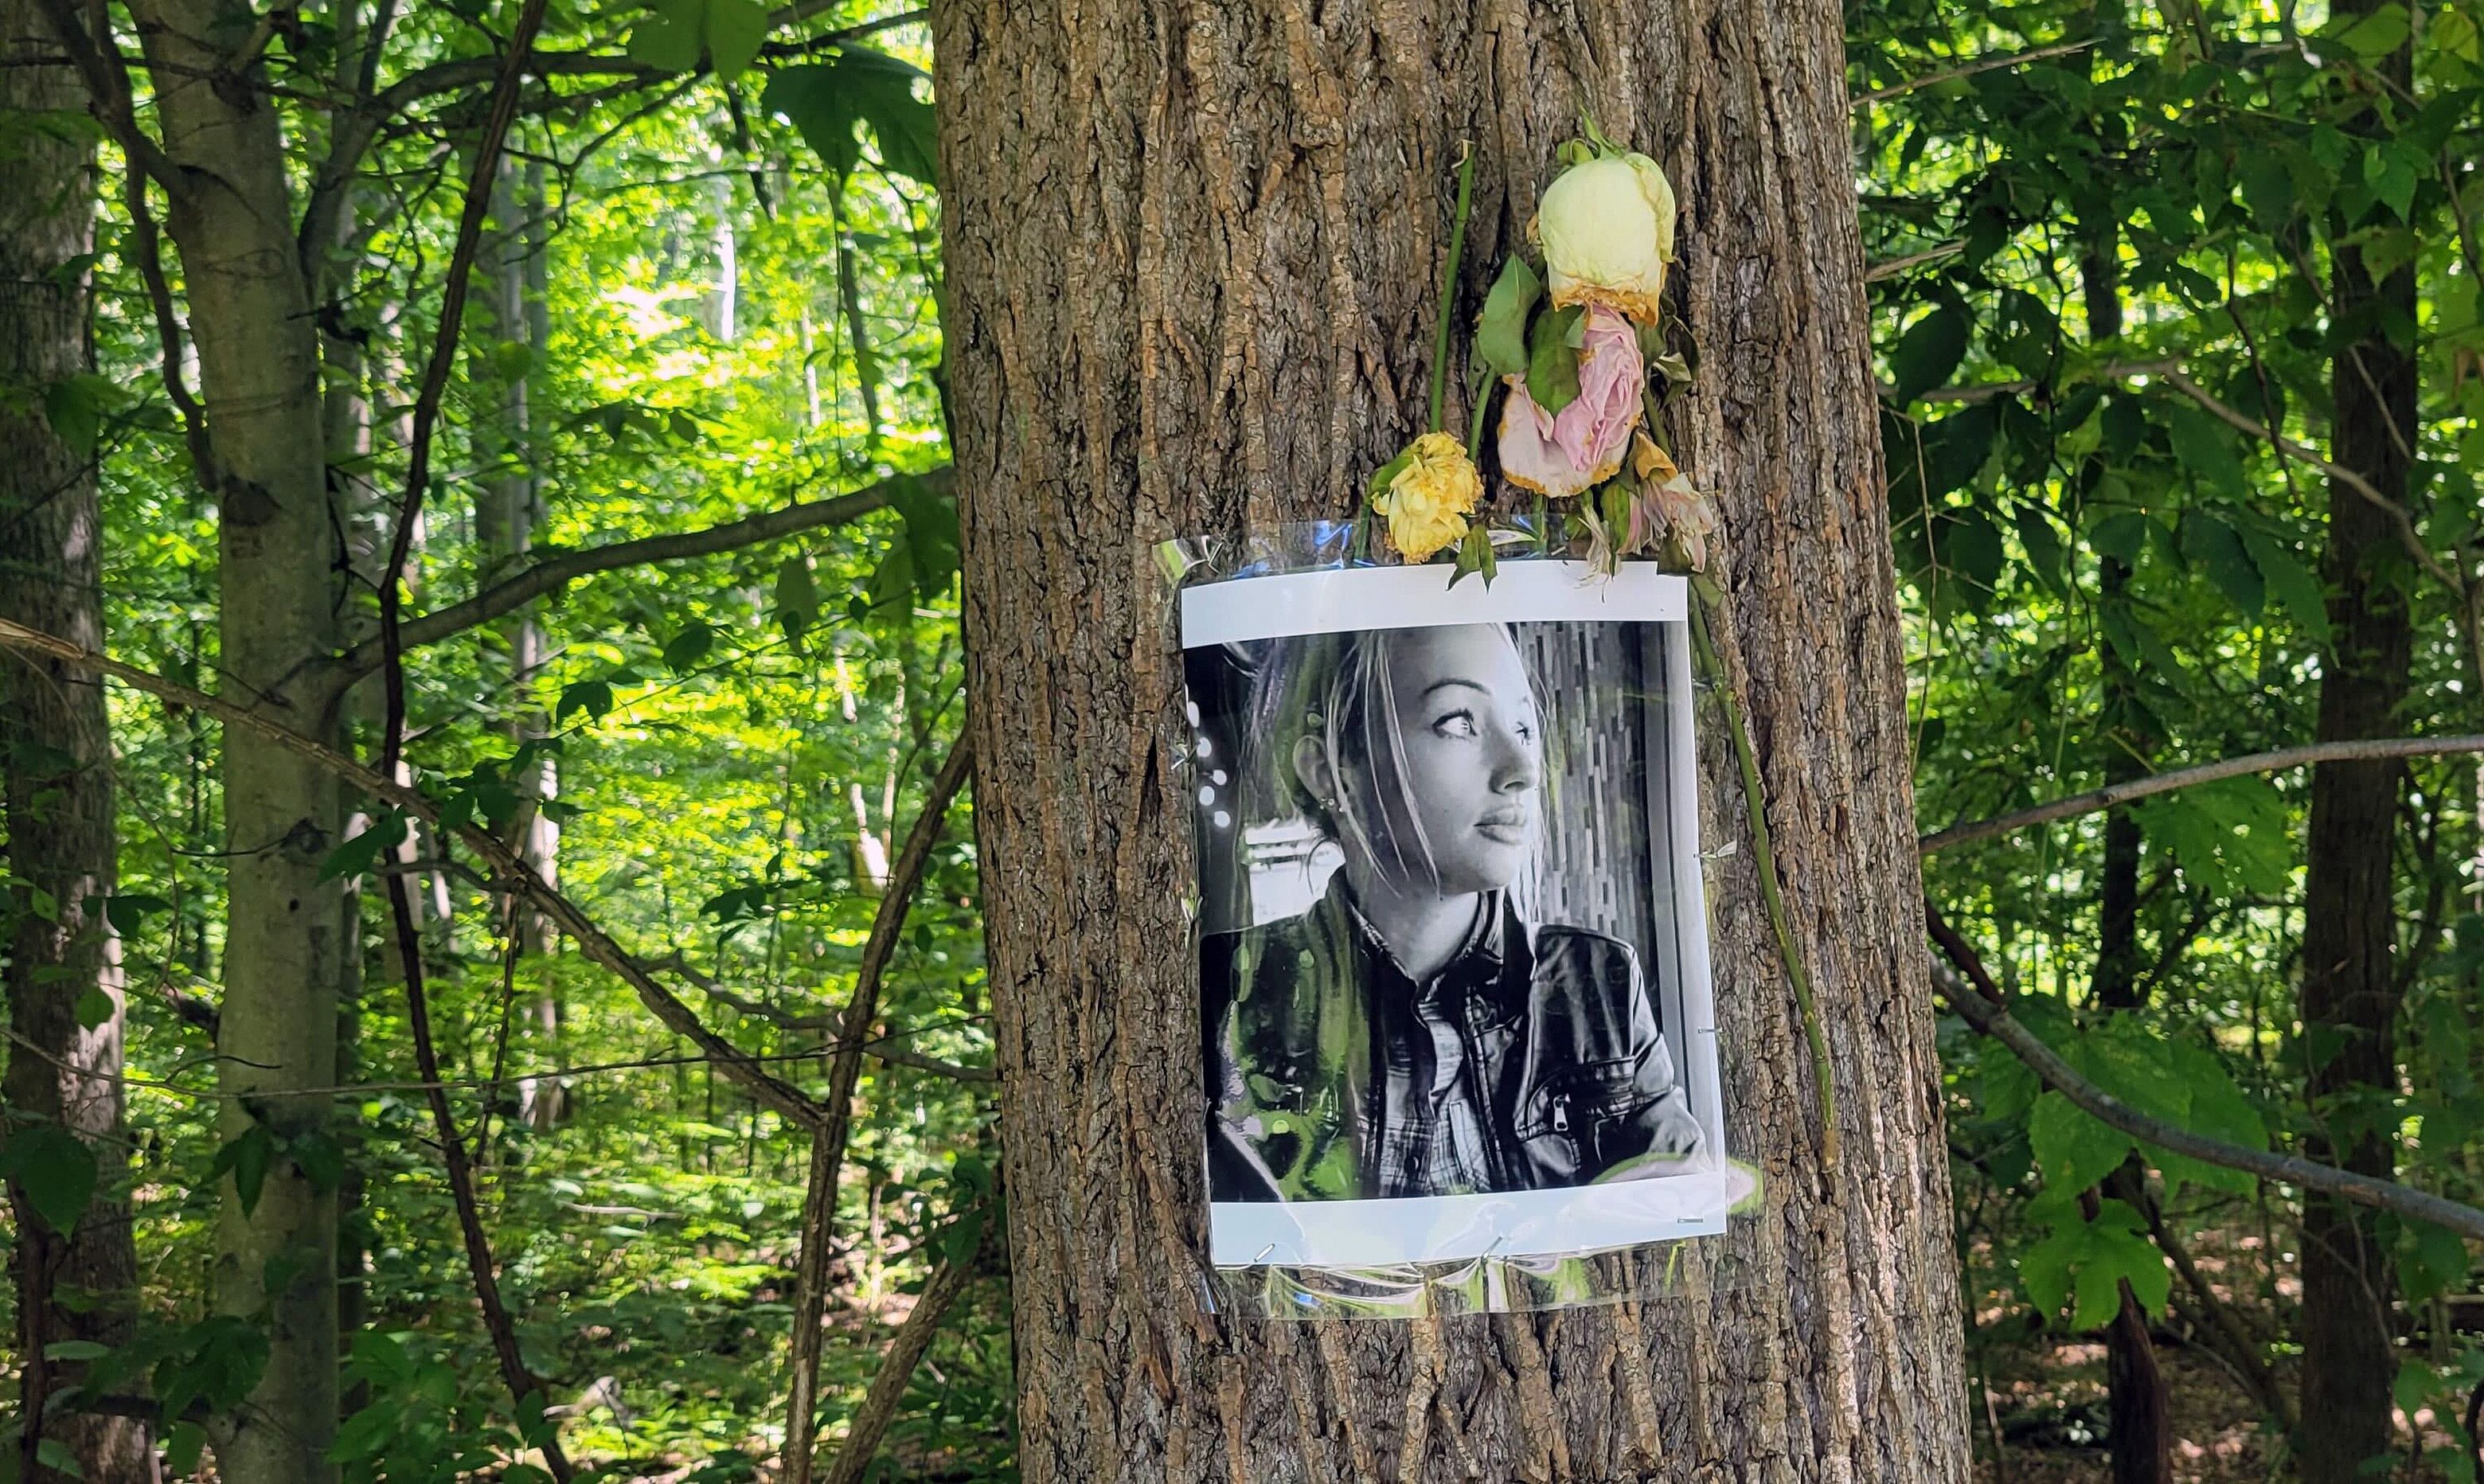 A memorial for Rachel Morin is displayed on a tree on the Ma & Pa Heritage Trail in Bel Air.